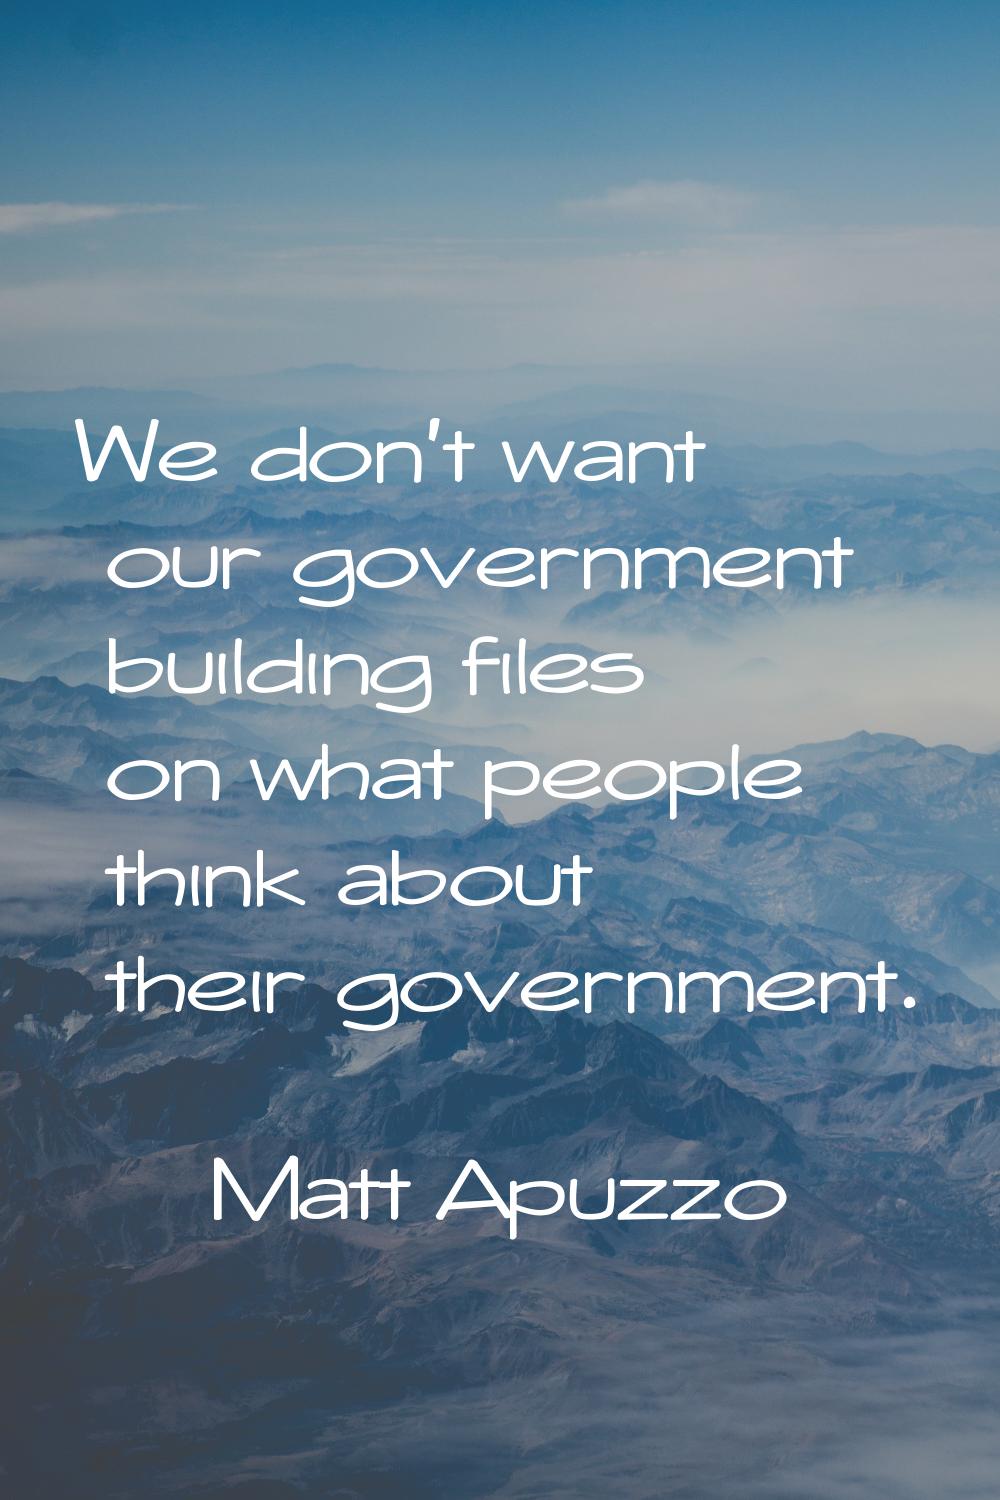 We don't want our government building files on what people think about their government.